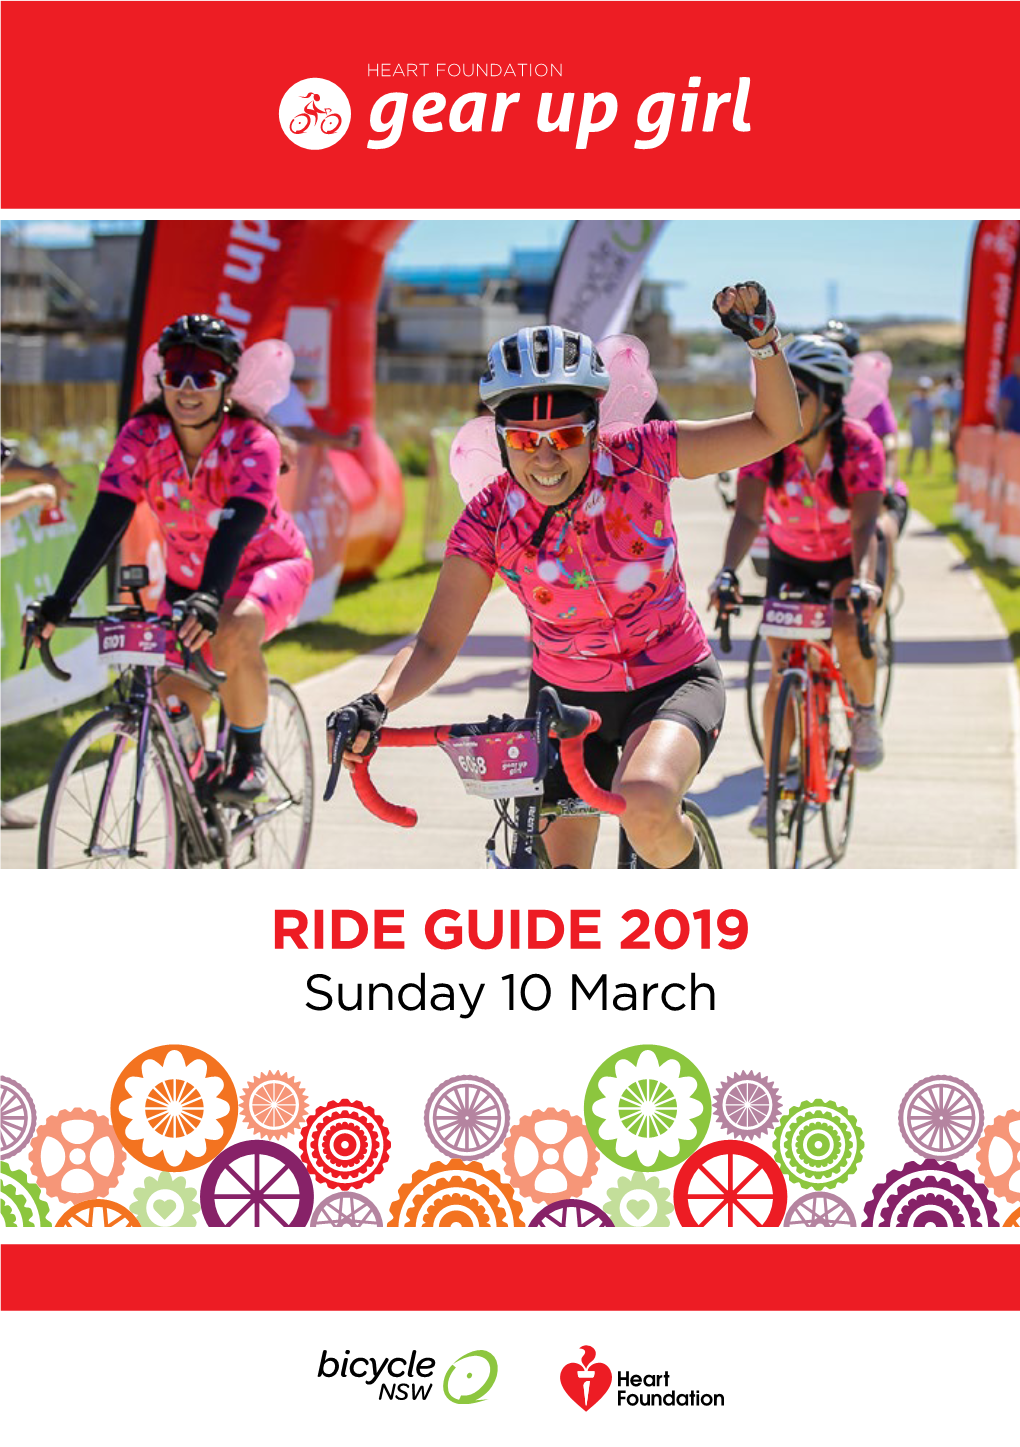 RIDE GUIDE 2019 Sunday 10 March Every Rider, Any Size